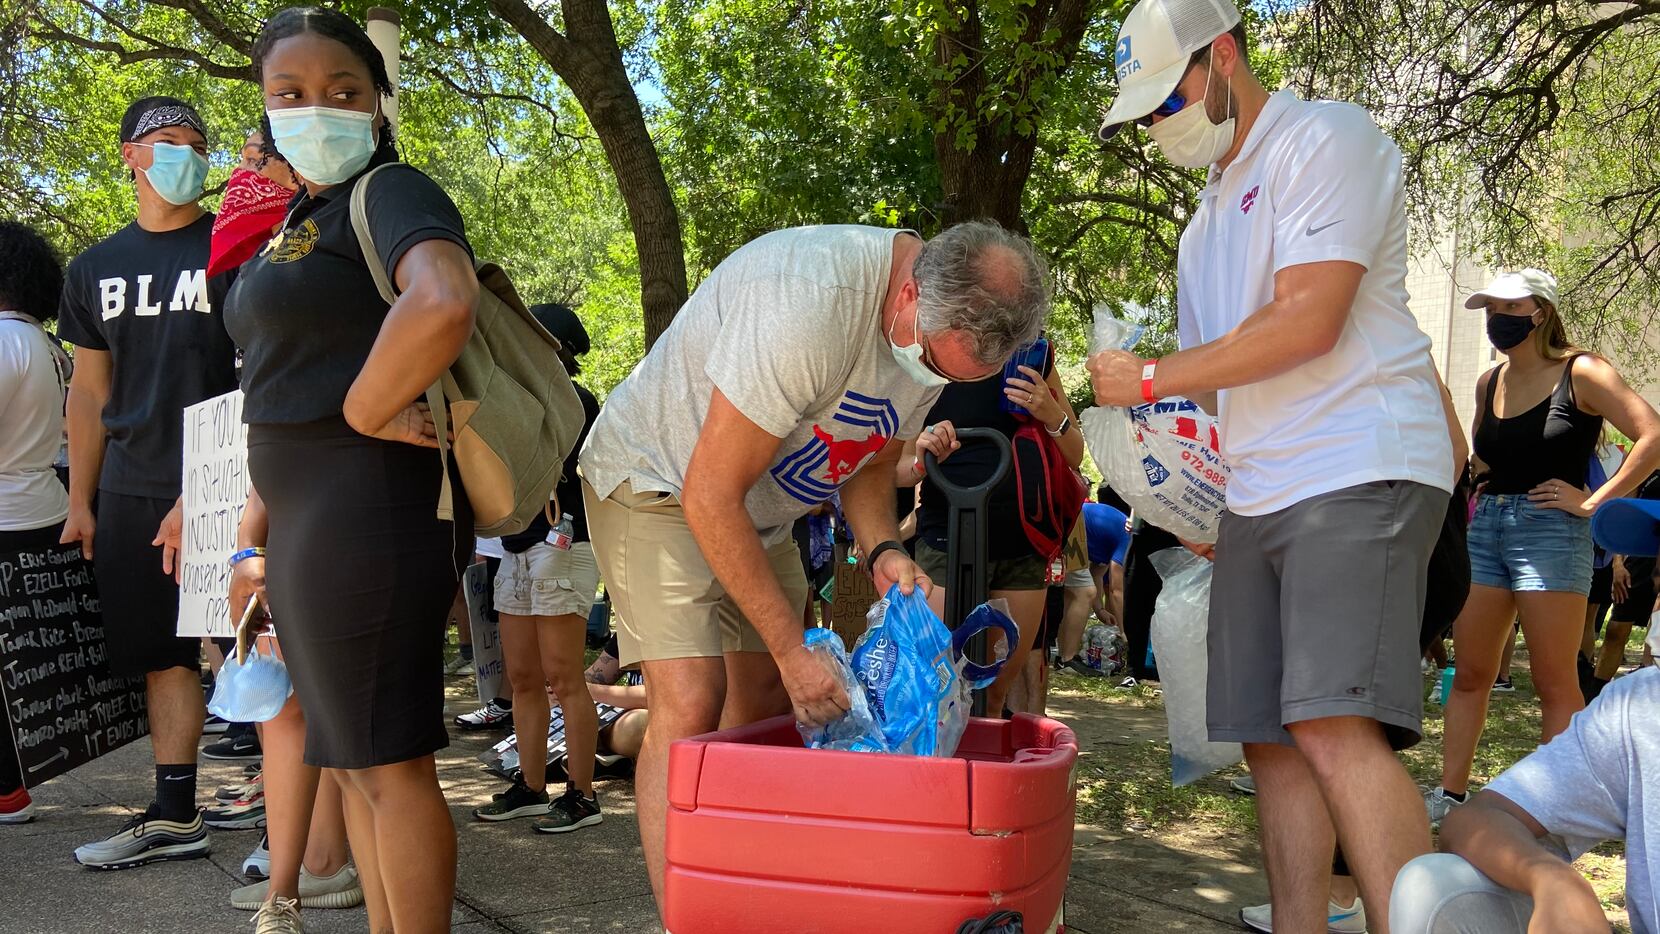 SMU football coach Sonny Dykes passes out water bottles while attending a protest at Dallas...